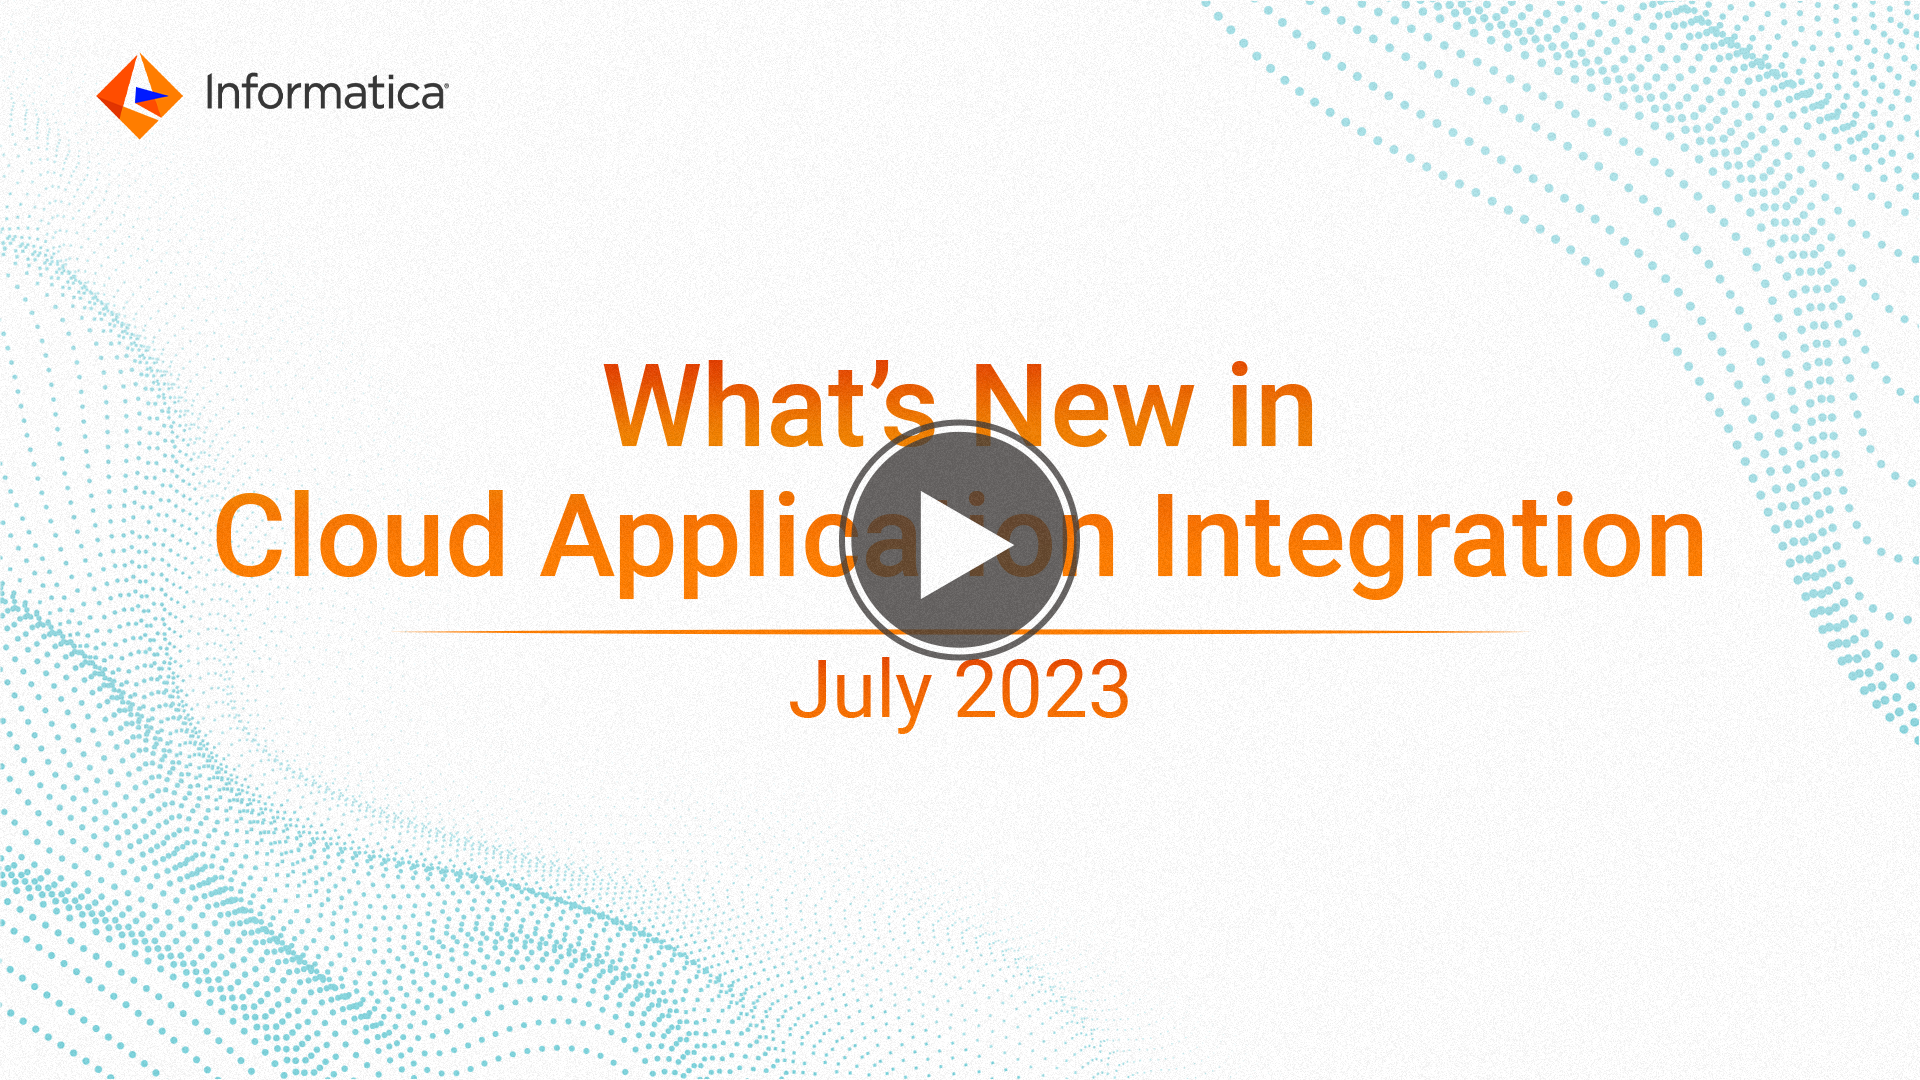 Application Integration What's New video for July 2023 release.